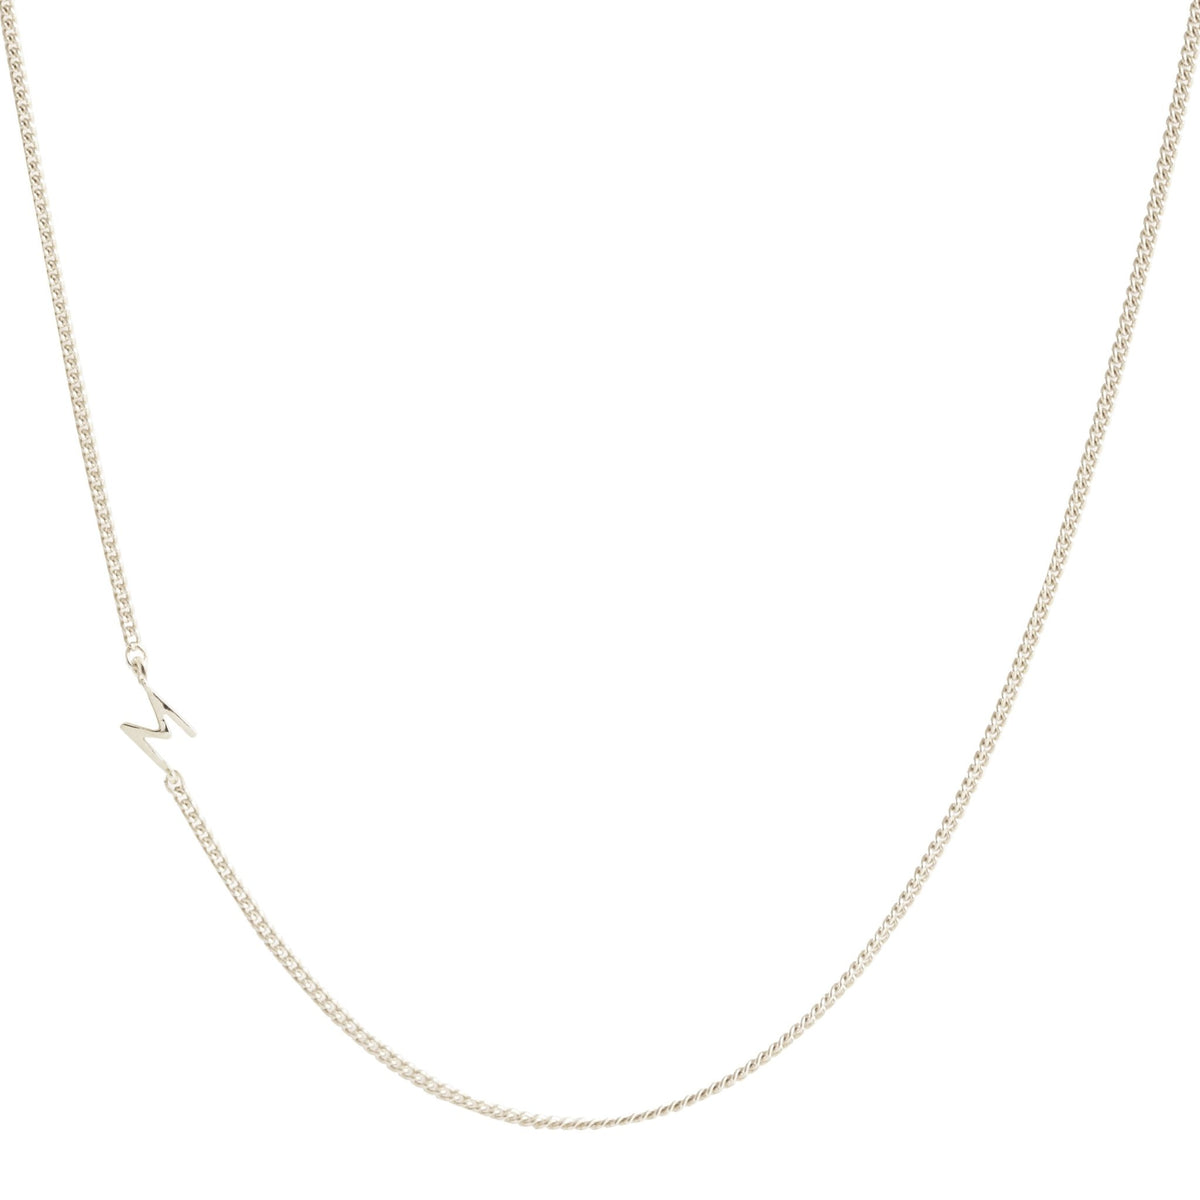 NOTABLE OFFSET INITIAL NECKLACE - M - GOLD, ROSE GOLD, OR SILVER - SO PRETTY CARA COTTER